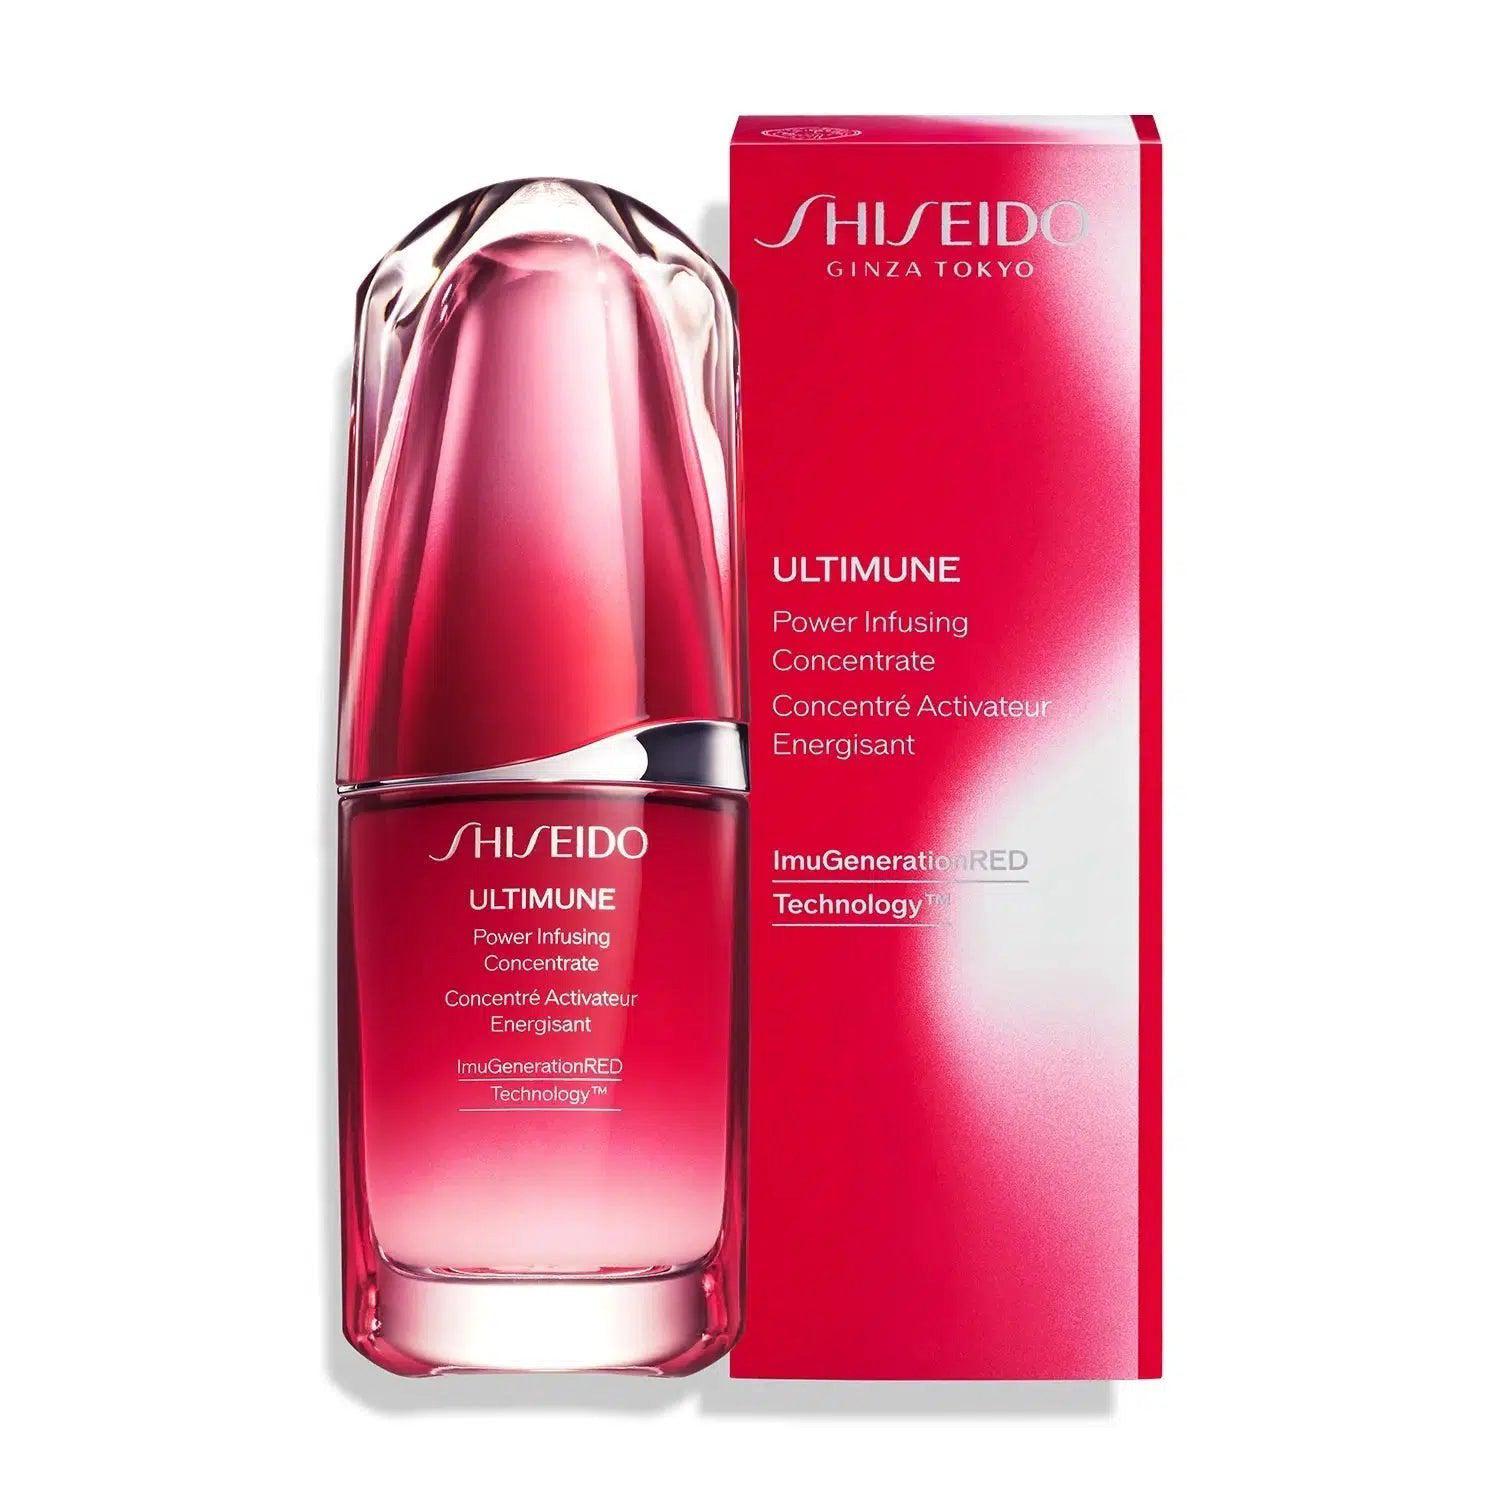 Shiseido Ultimune Power Infusing Concentrate Ⅲ Serum 50ml